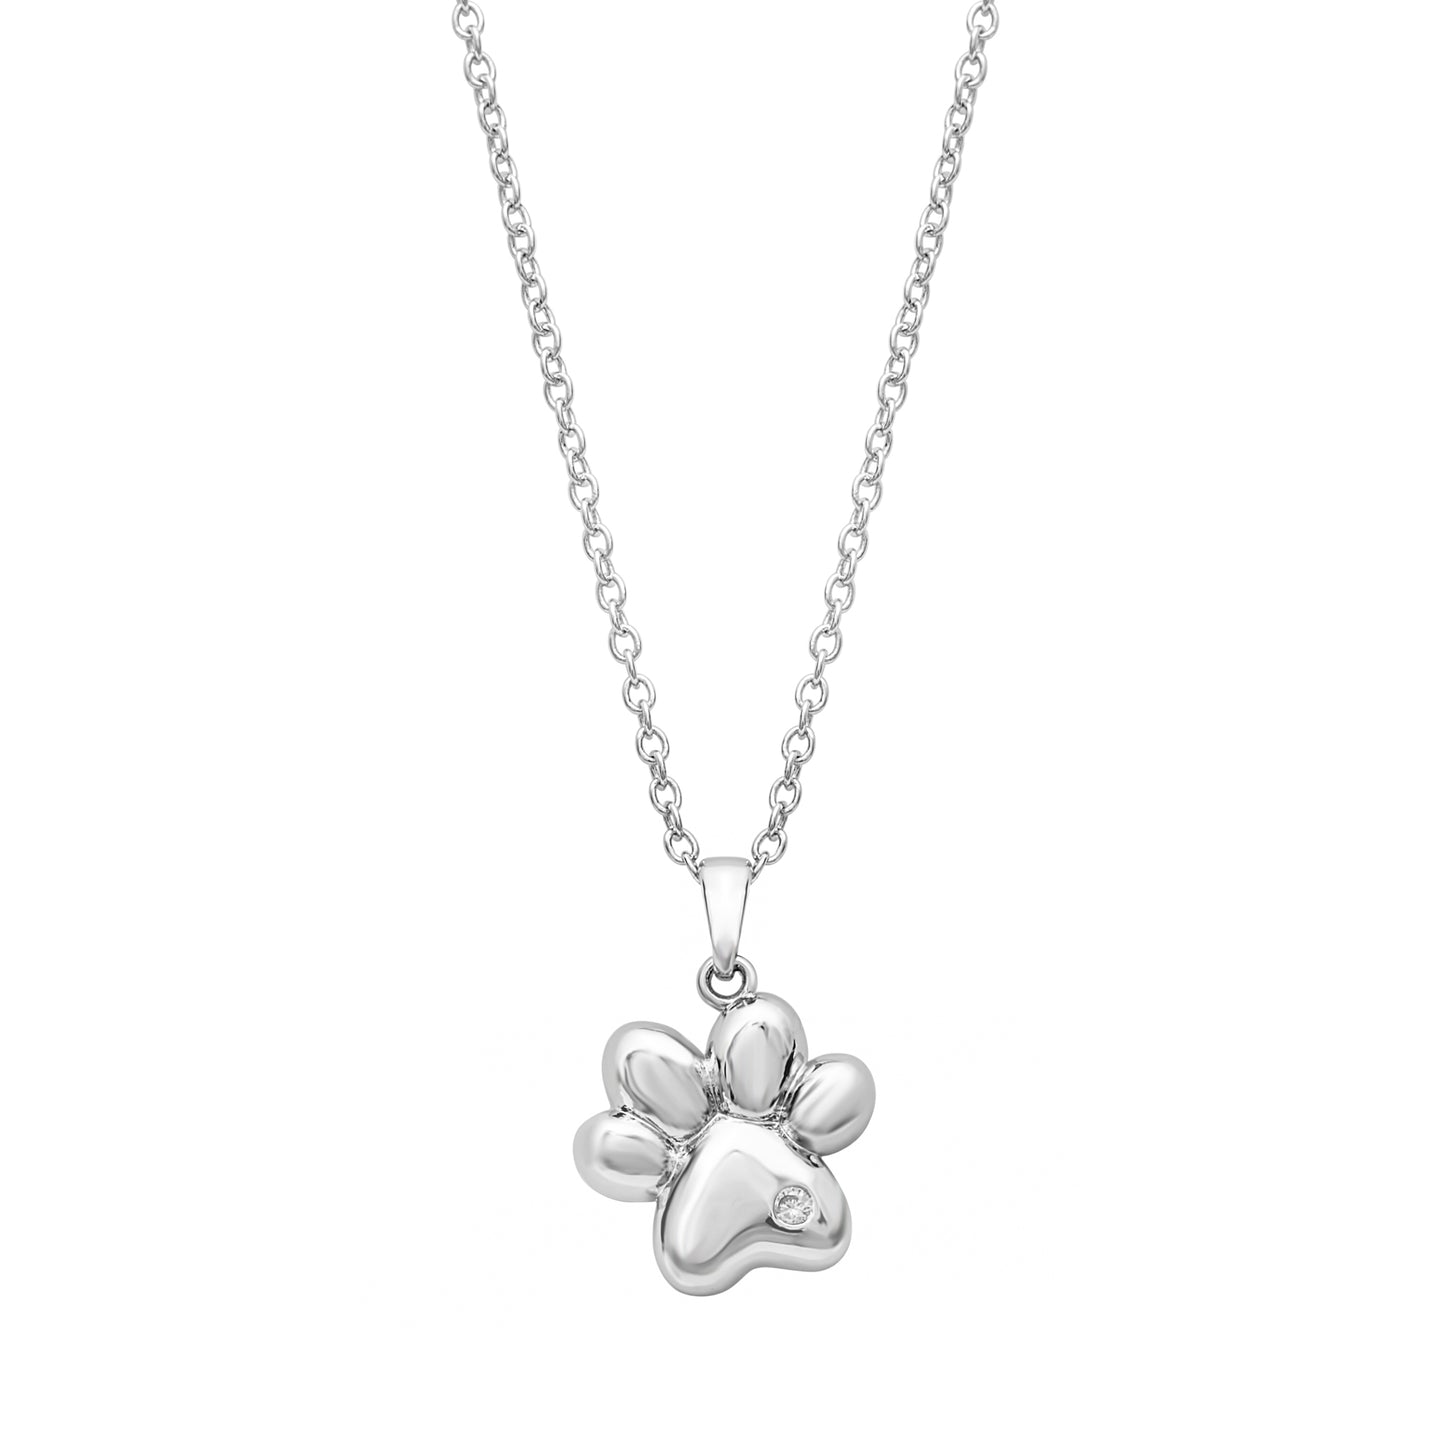 Silvertone Paw Print Pendant Necklace With Swarovski Crystals On Card